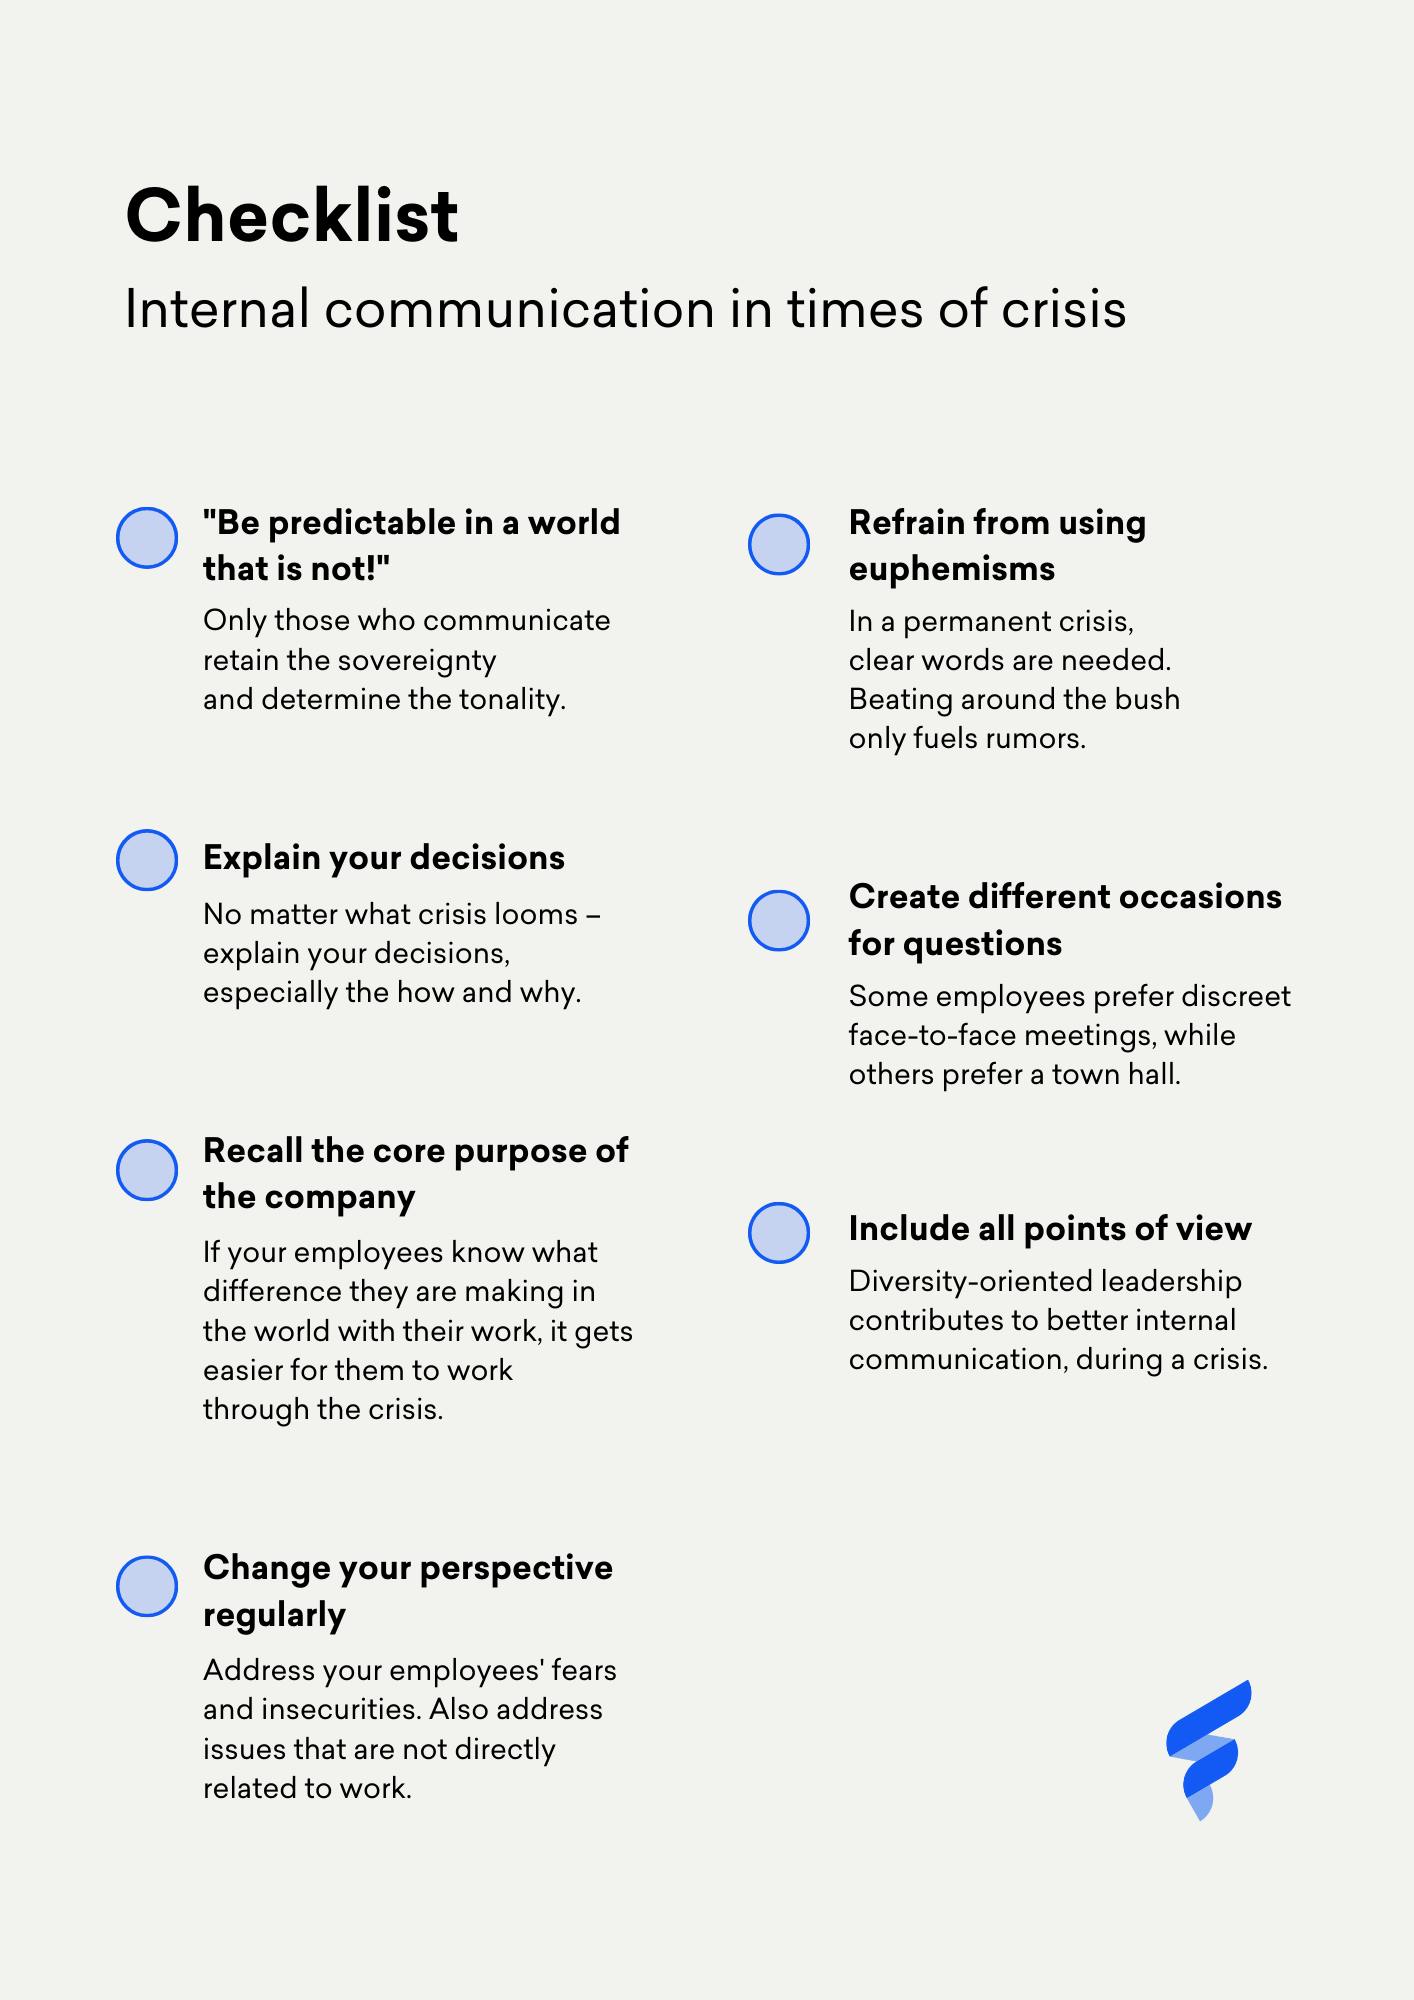 Checklist for internal communication in times of crisis